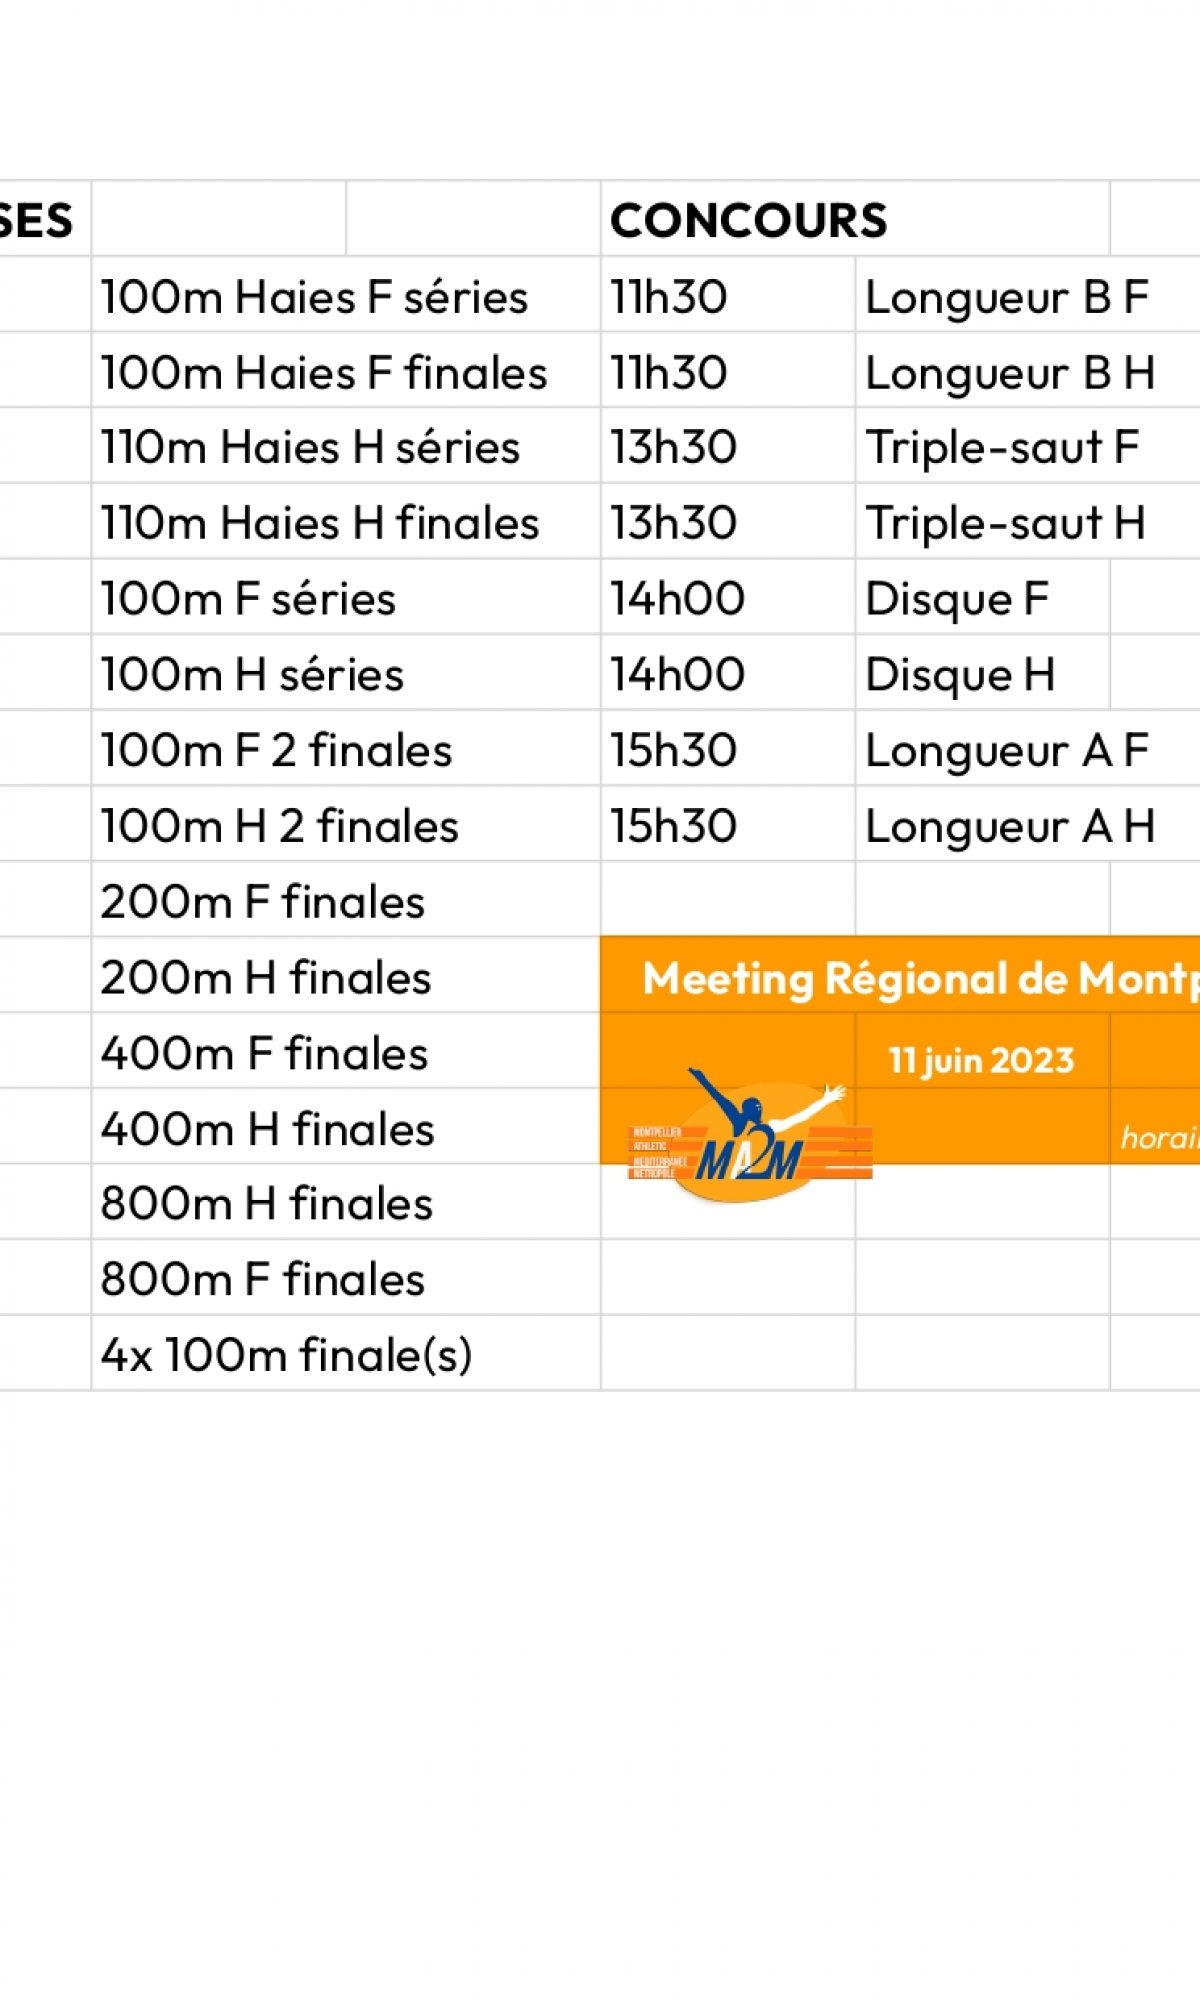 11 juin 2023 - horaires (2)_page-0001